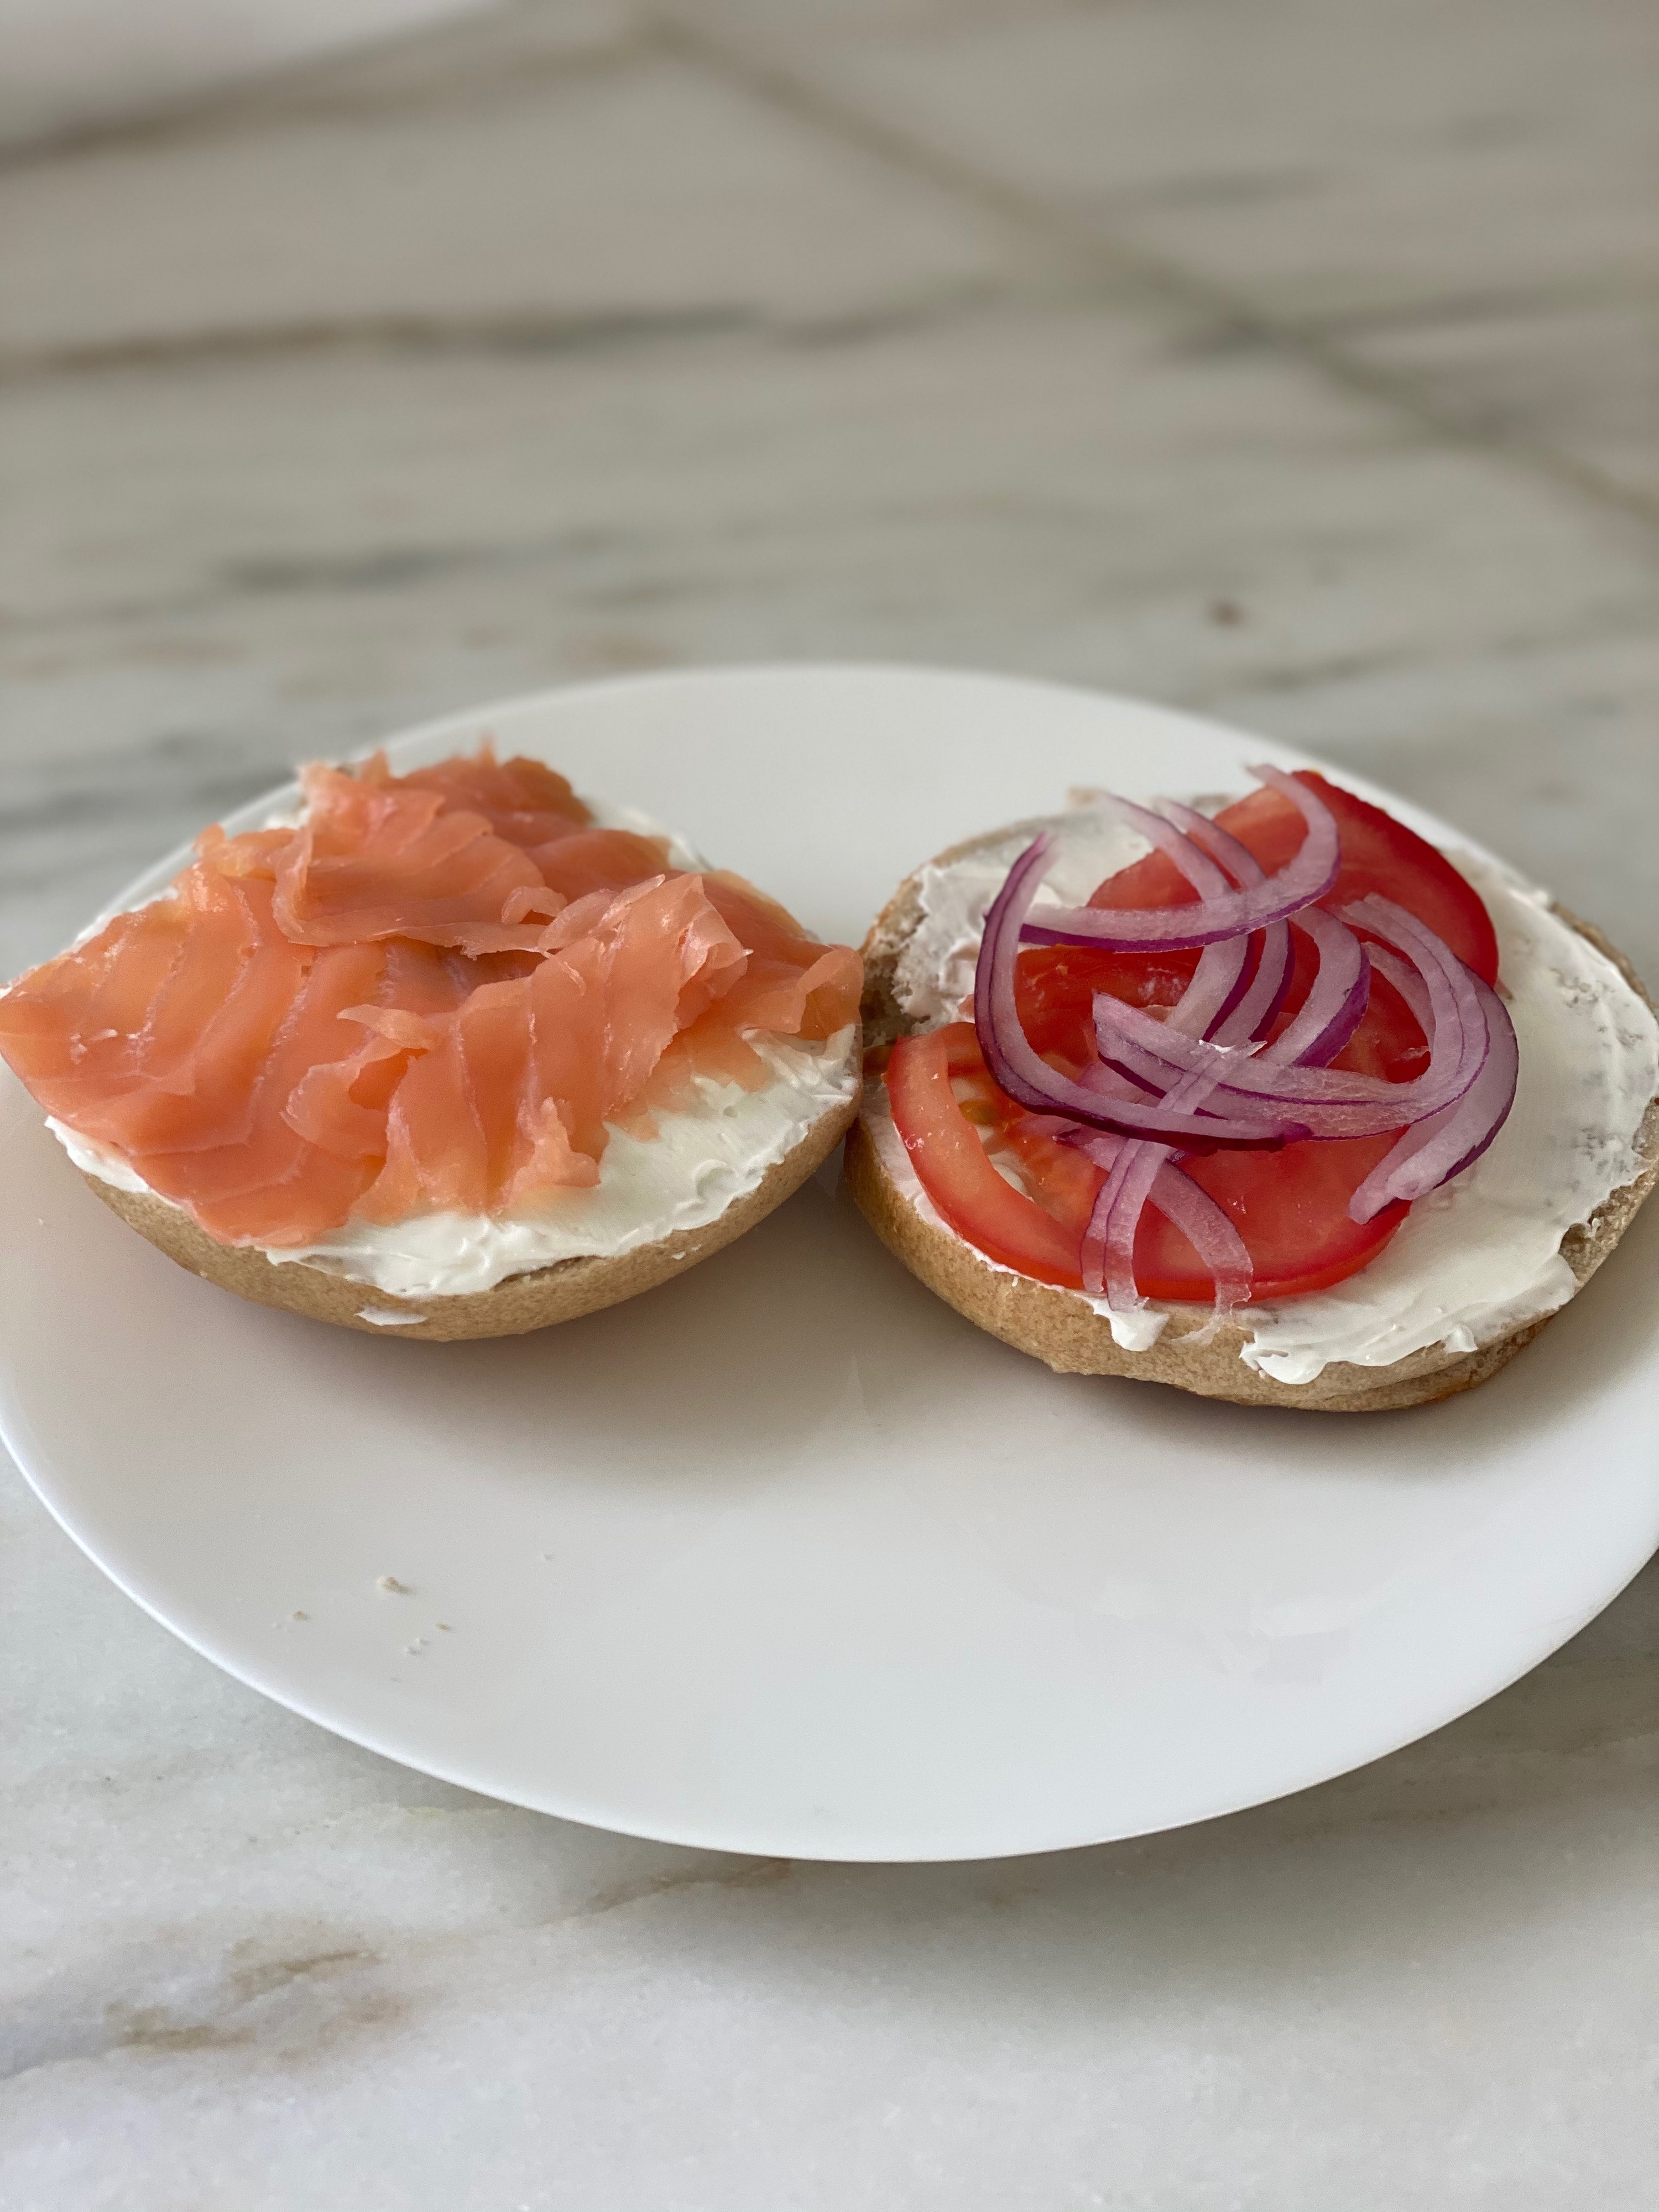 A bagel topped with cream cheese, lox, tomato, and red onion.